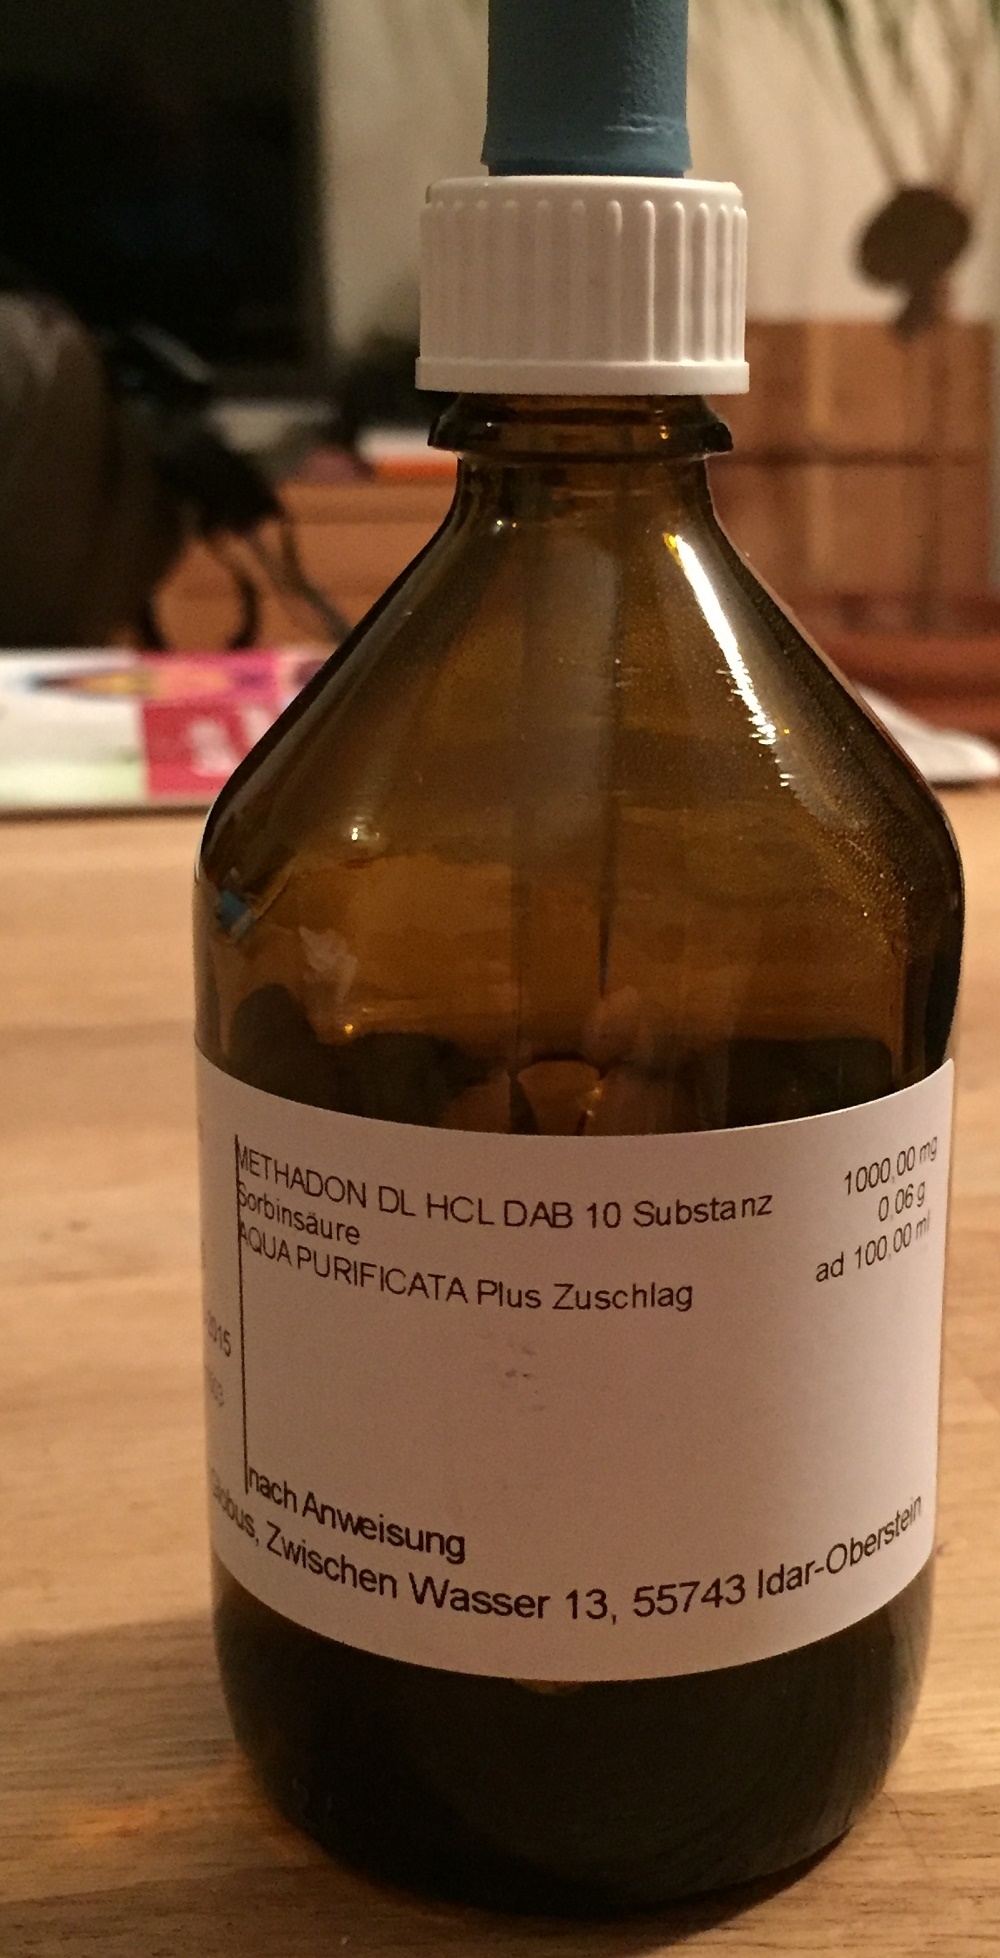 Photo showing a bottle with methadone.